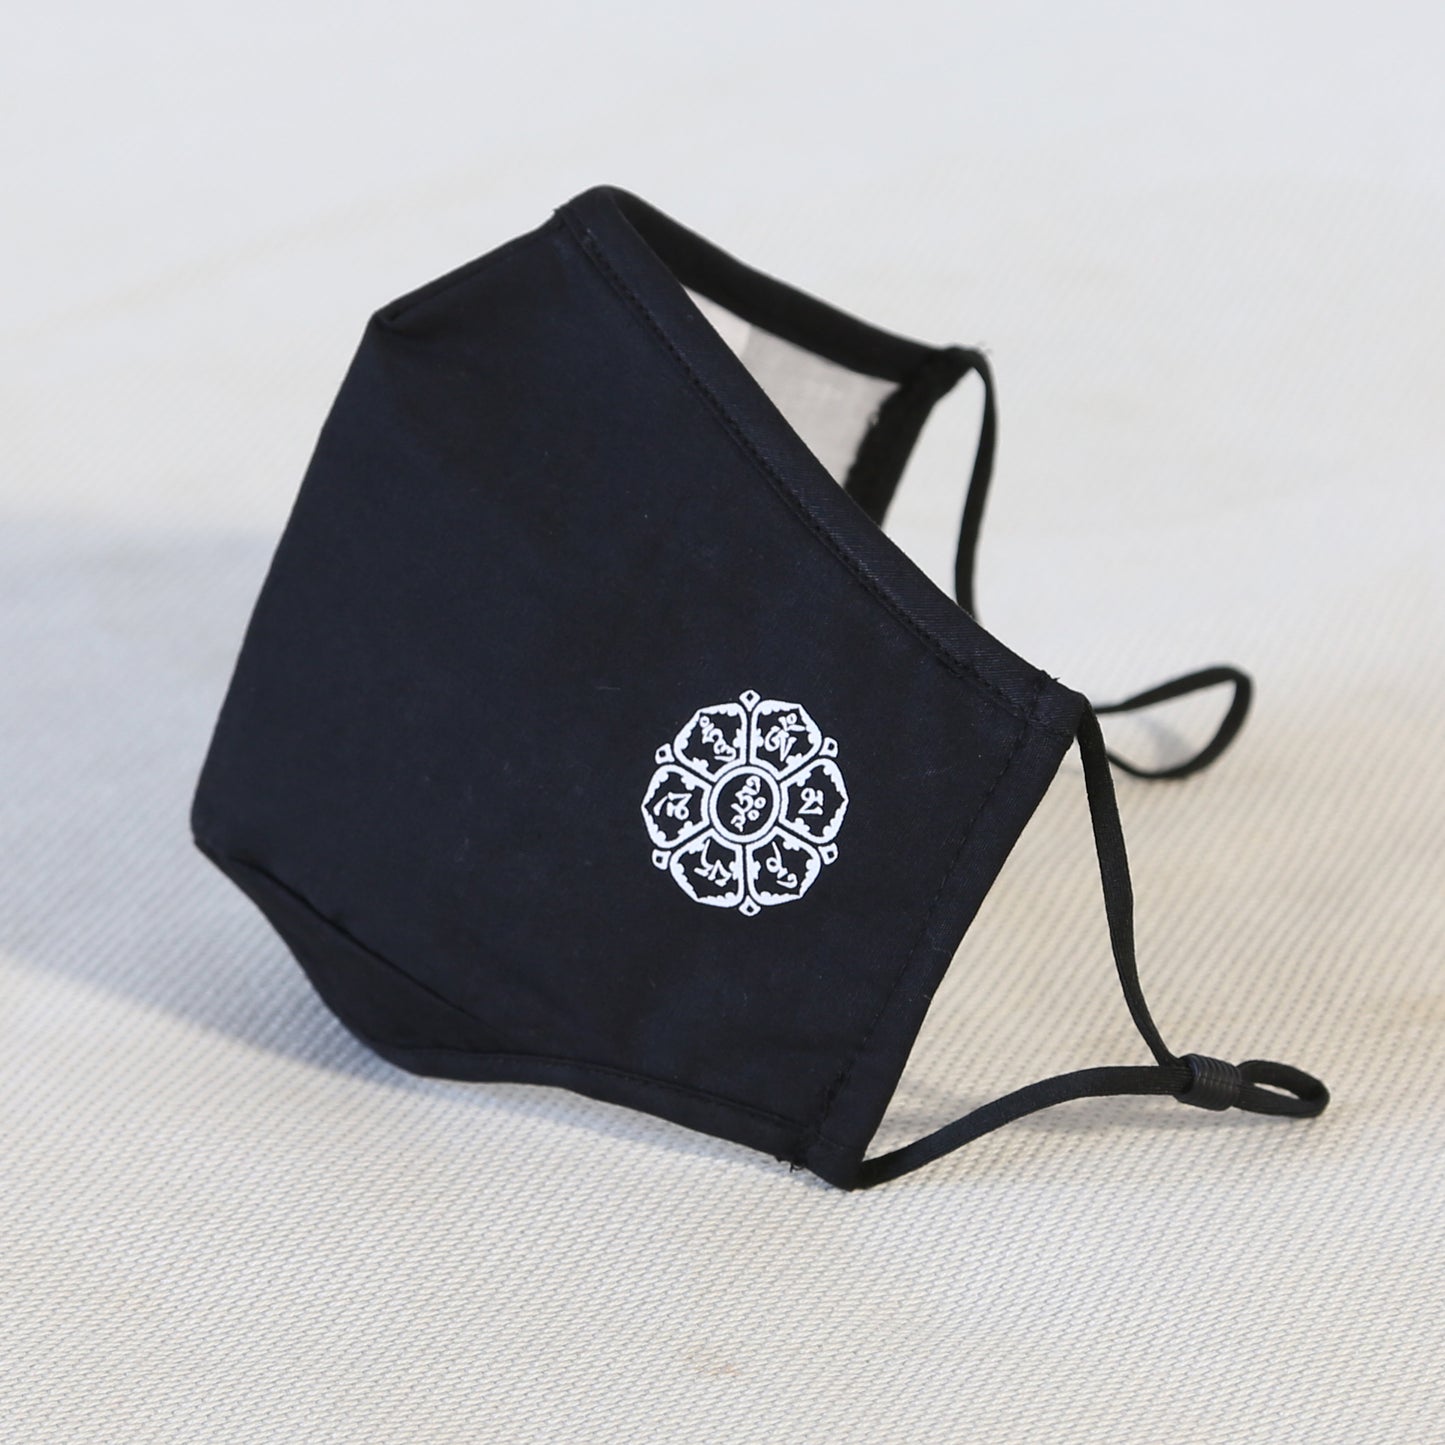 Zen Buddhism Adjustable Washable Cloth Face Mask Covering, 2-Layer with 2 Extra Filters